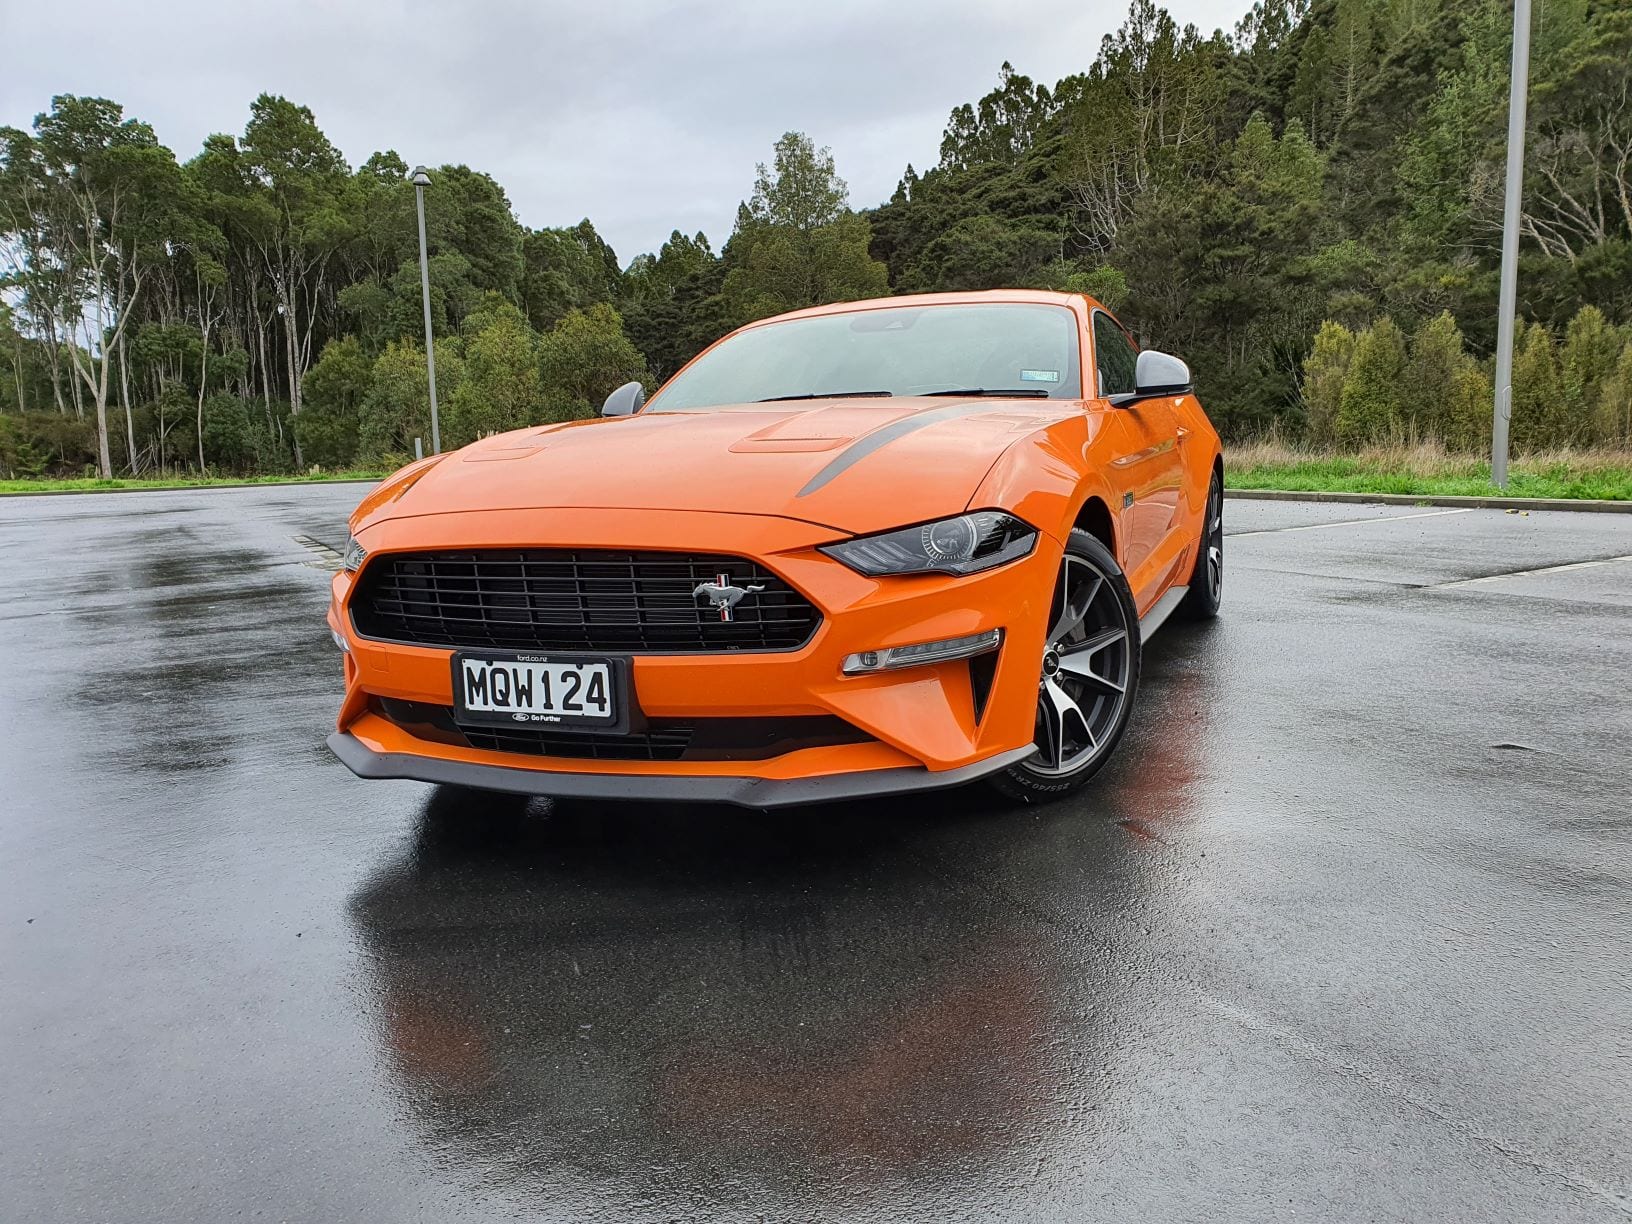 A frontal view of the Ford Mustang High Performance in orange